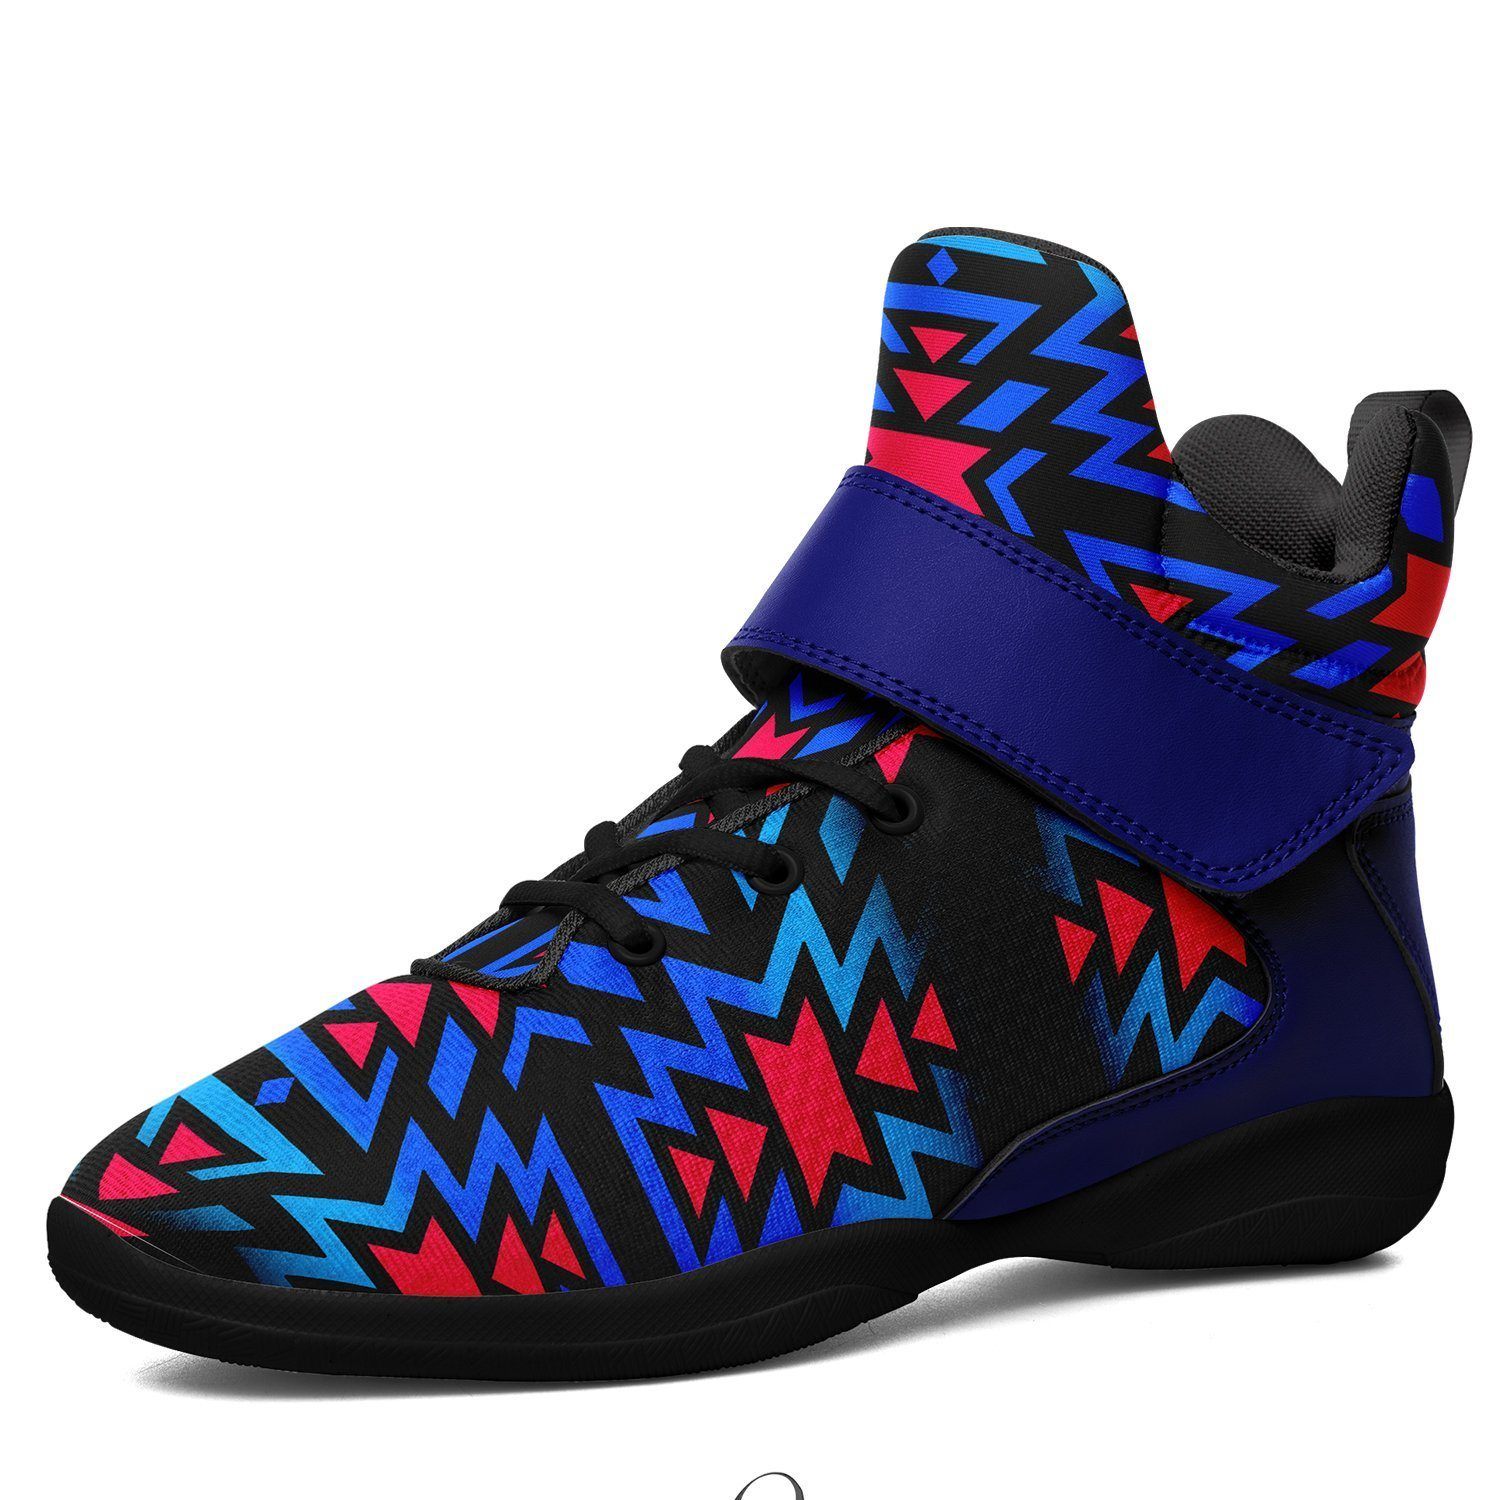 Black Fire Dragonfly Ipottaa Basketball / Sport High Top Shoes - Black Sole 49 Dzine US Men 7 / EUR 40 Black Sole with Blue Strap 